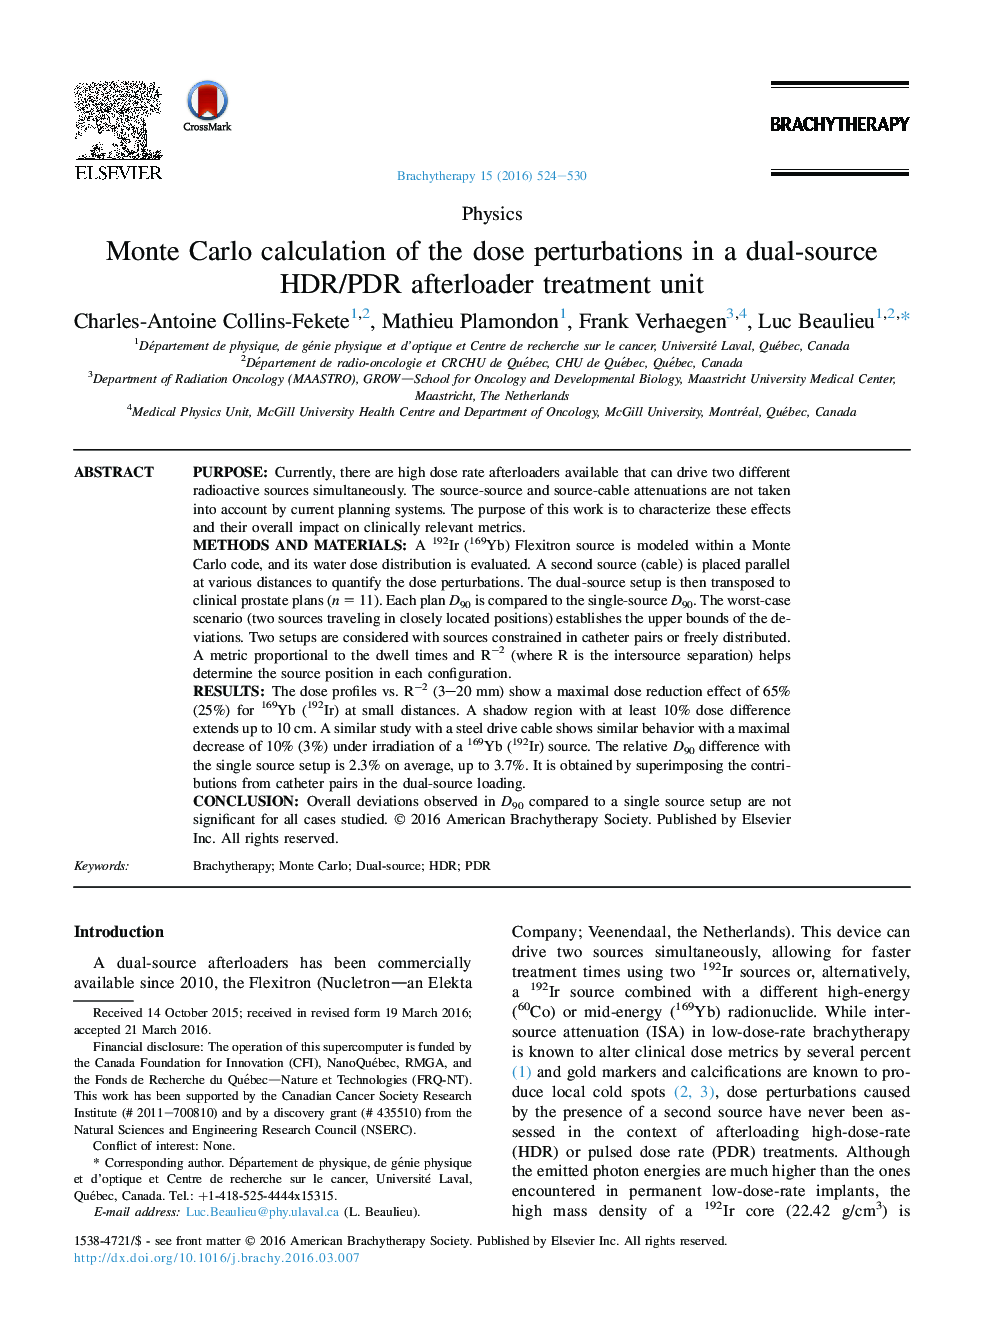 Monte Carlo calculation of the dose perturbations in a dual-source HDR/PDR afterloader treatment unit